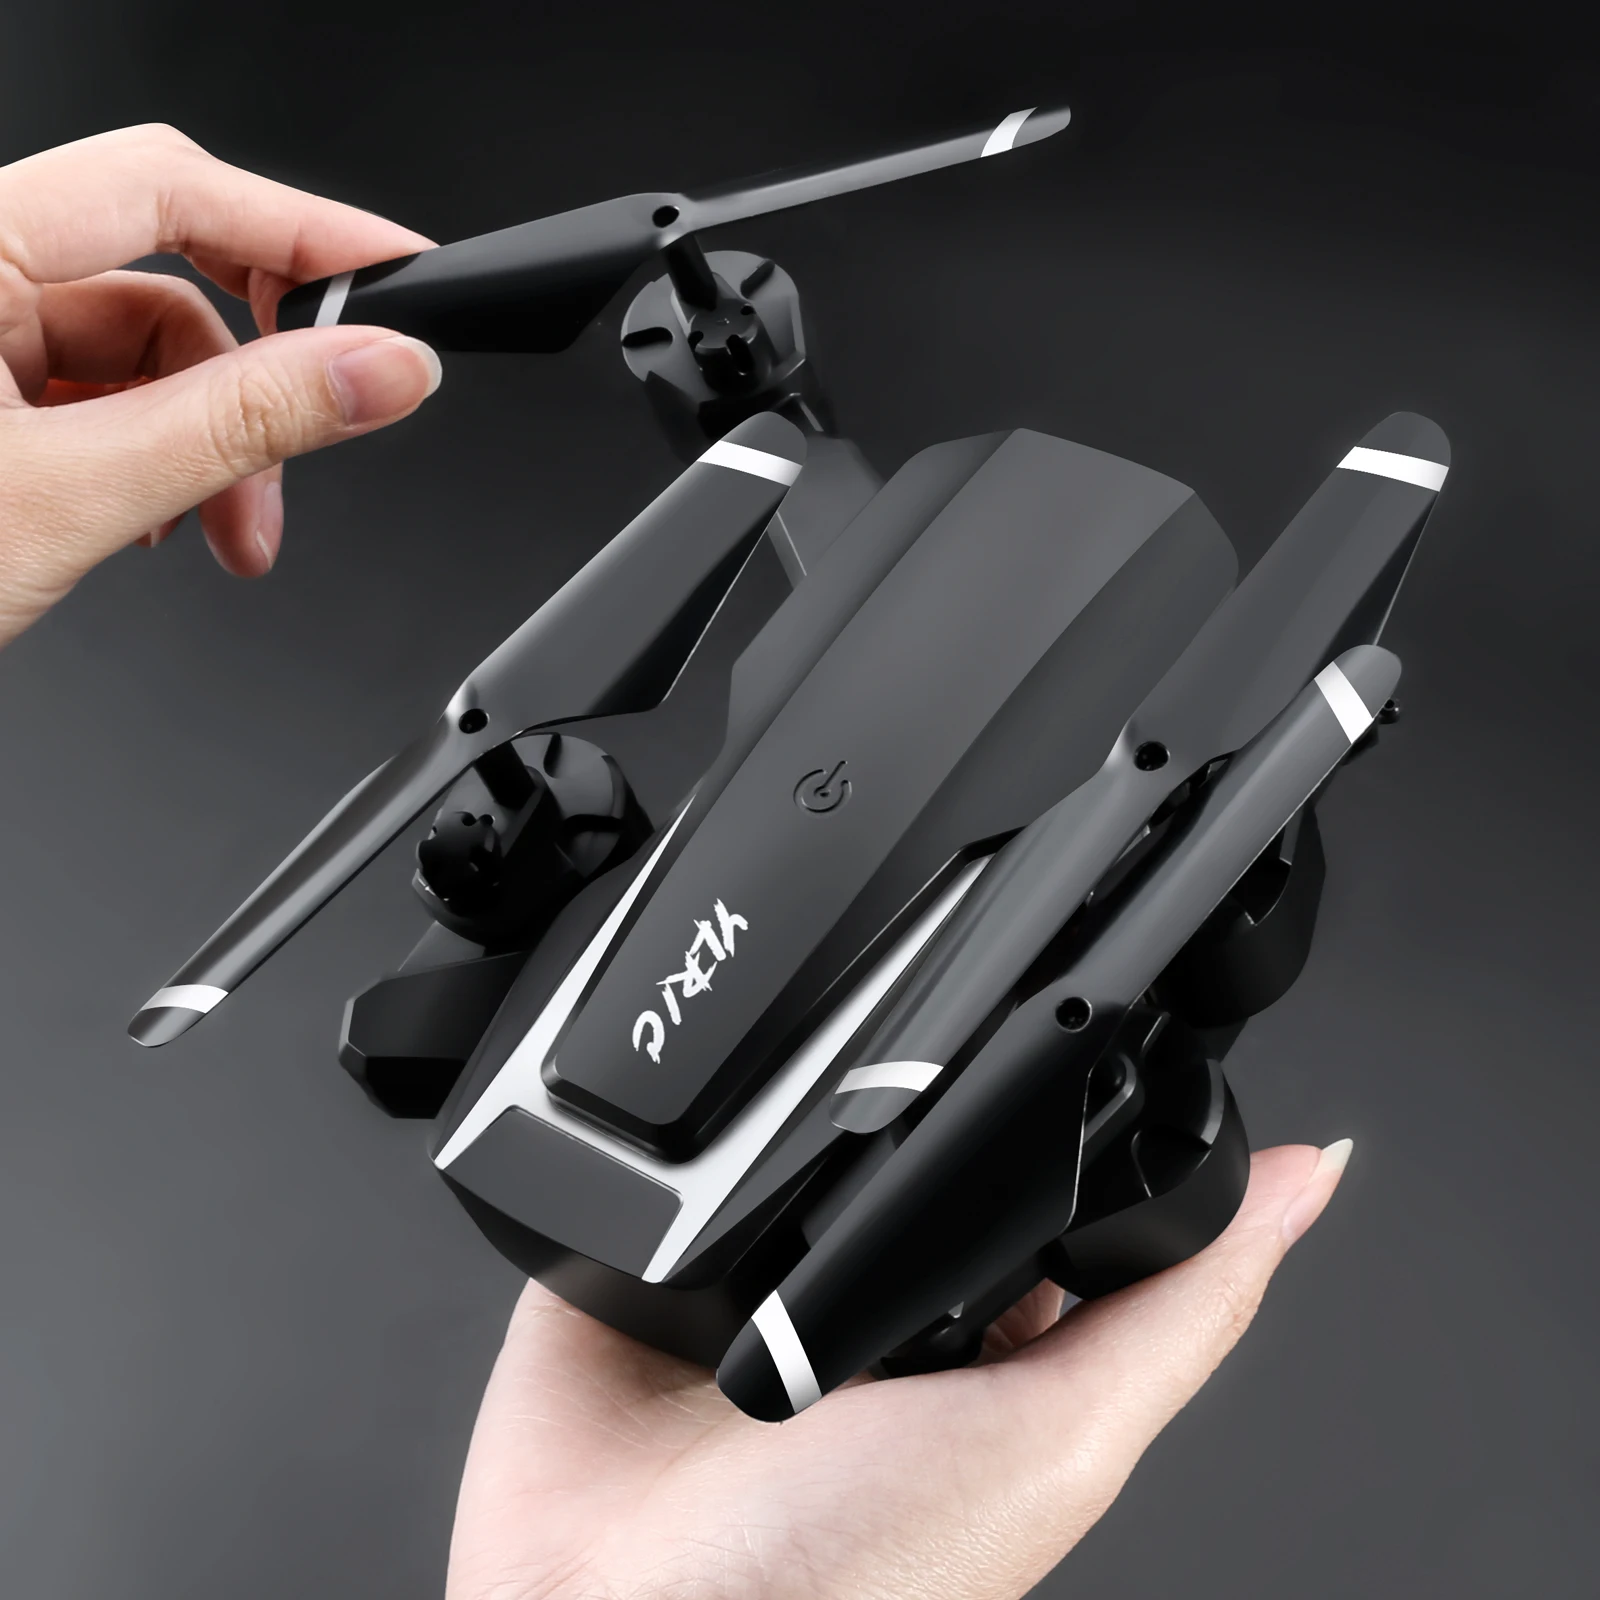 Newest Drone 4k Professional HD Wide Angle Camera 1080P WiFi Fpv Drone Dual Camera Quadcopter Real Time Transmission Helicopter enlarge